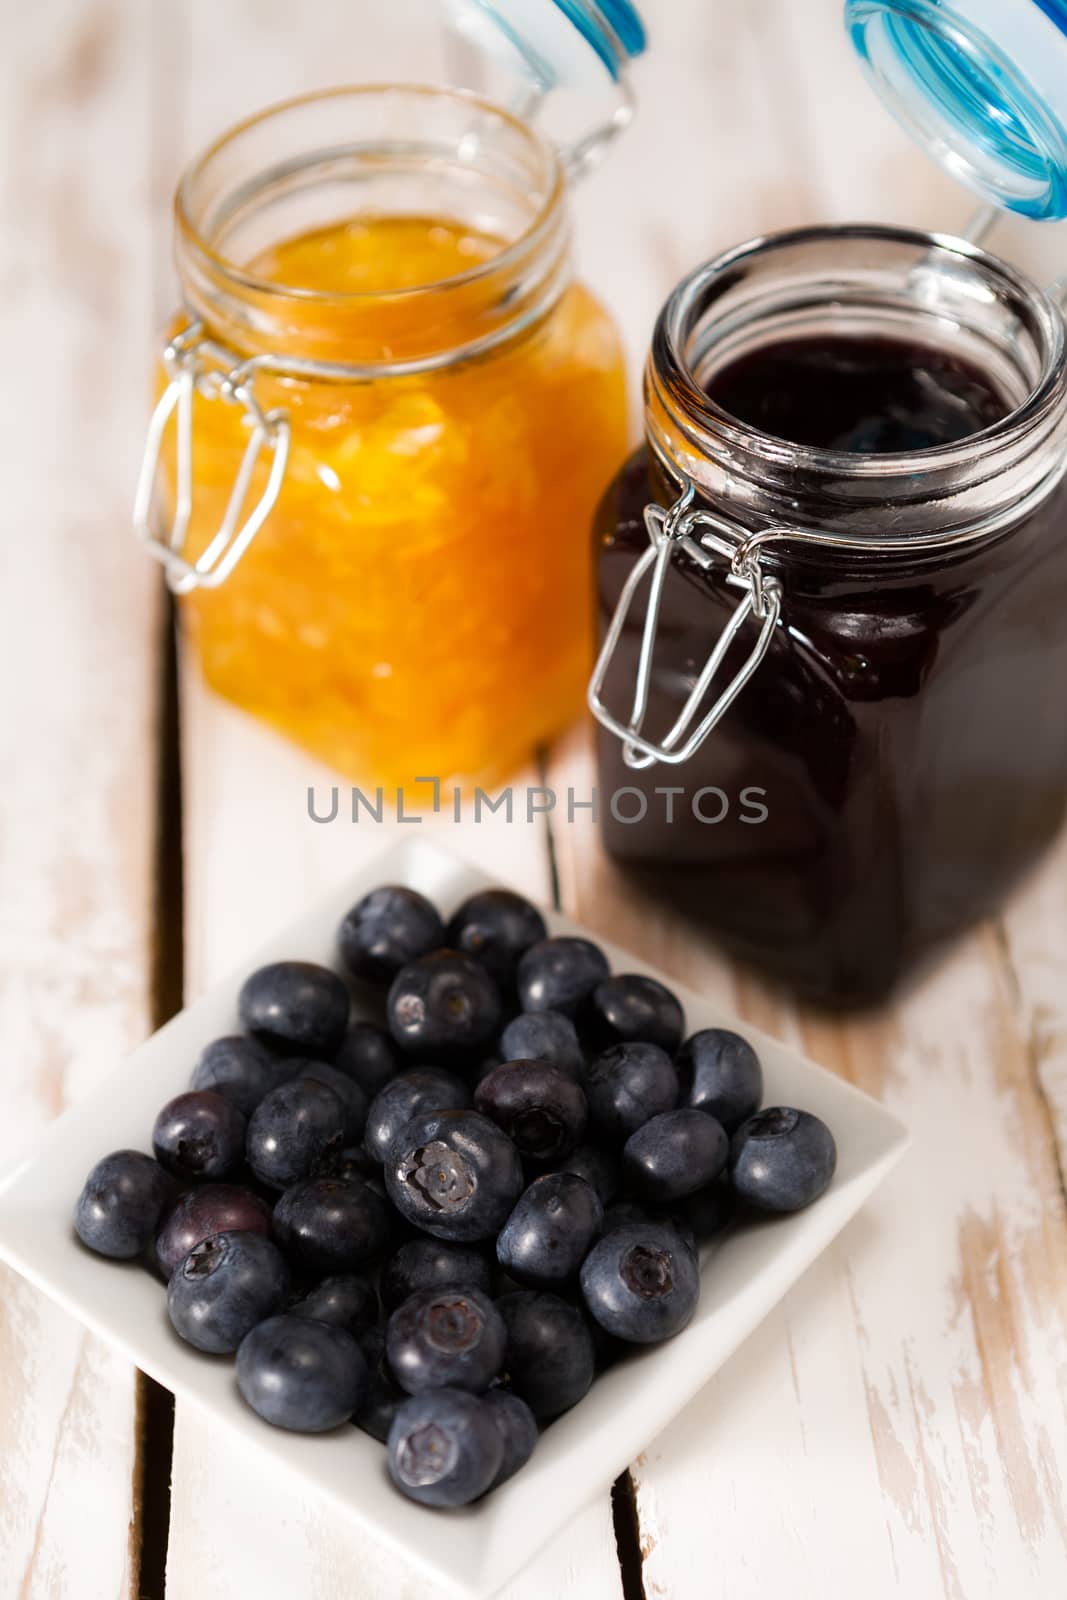 Blueberries with orange and blueberry jam over a wooden table